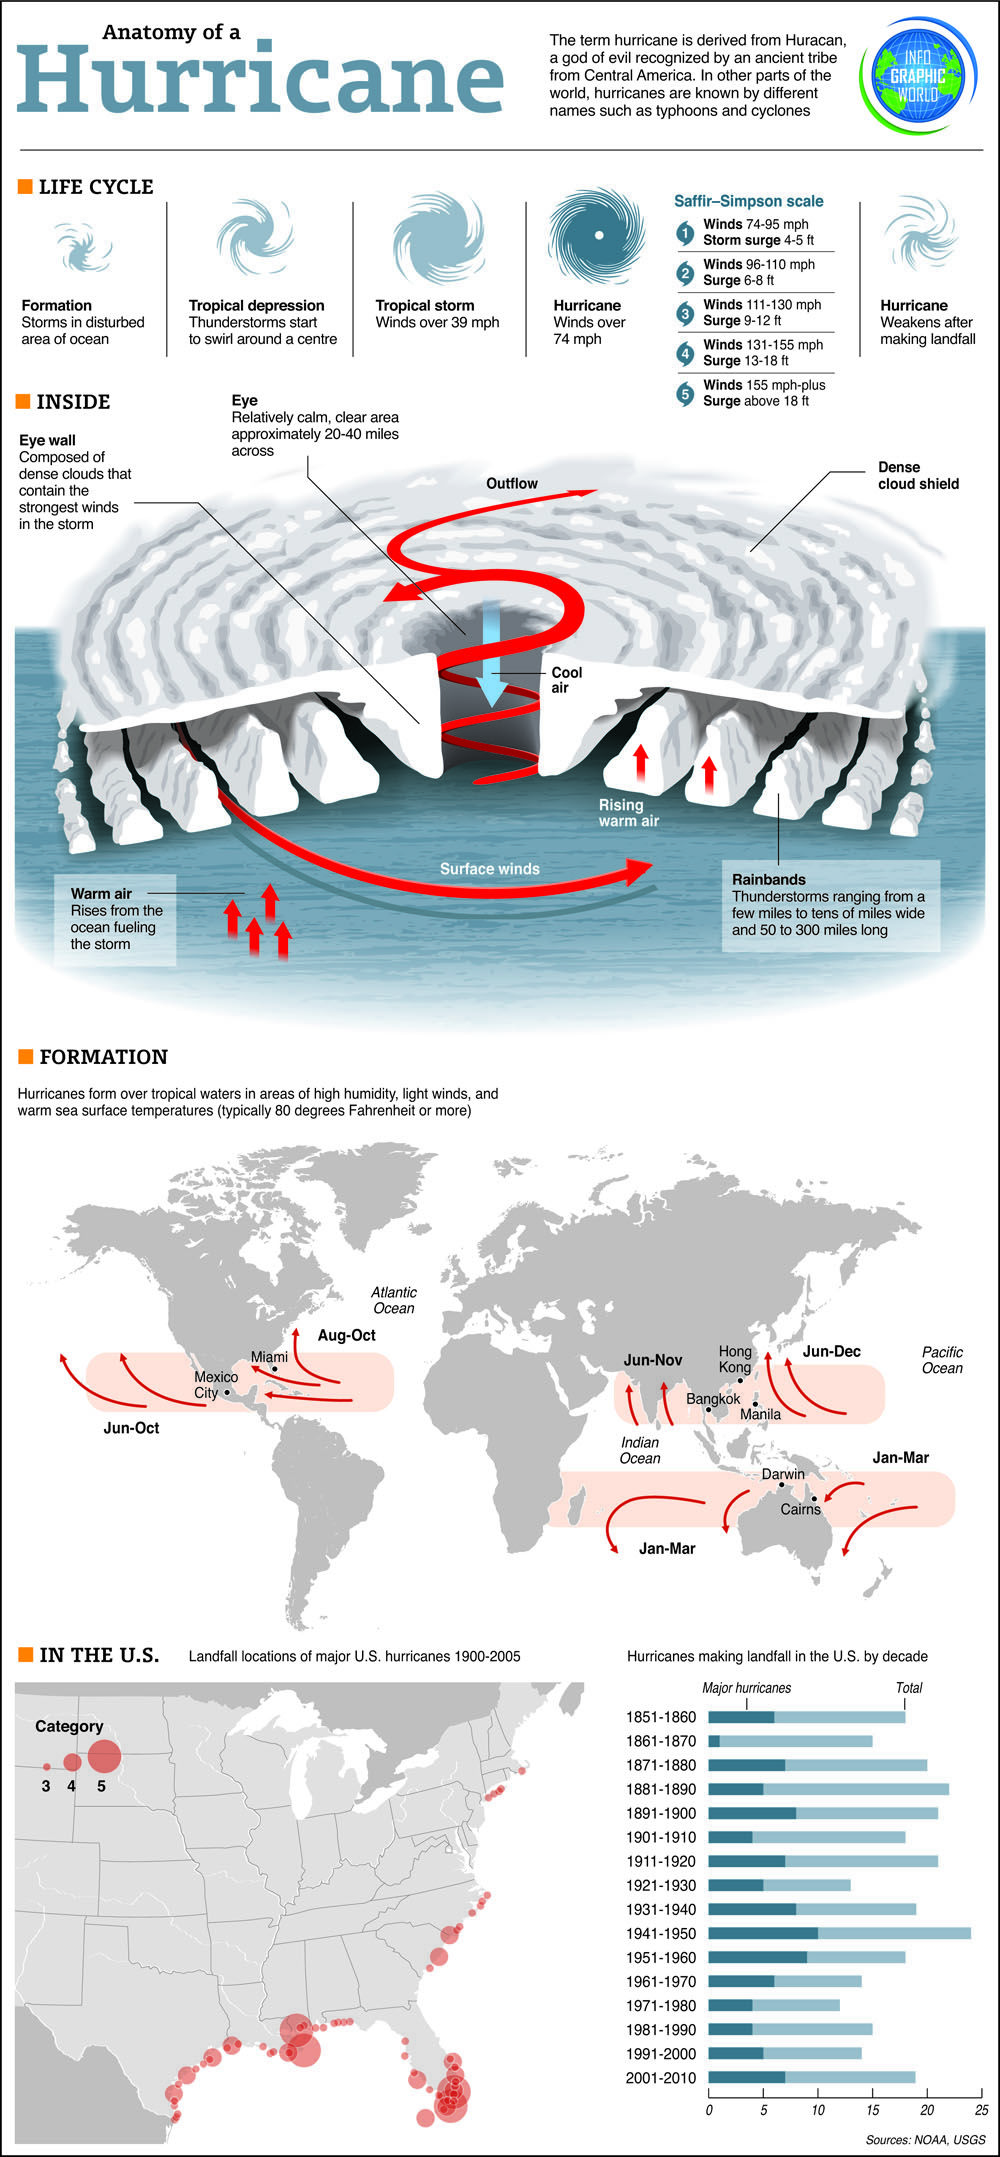 Interesting infographic on hurricane formation and history ...